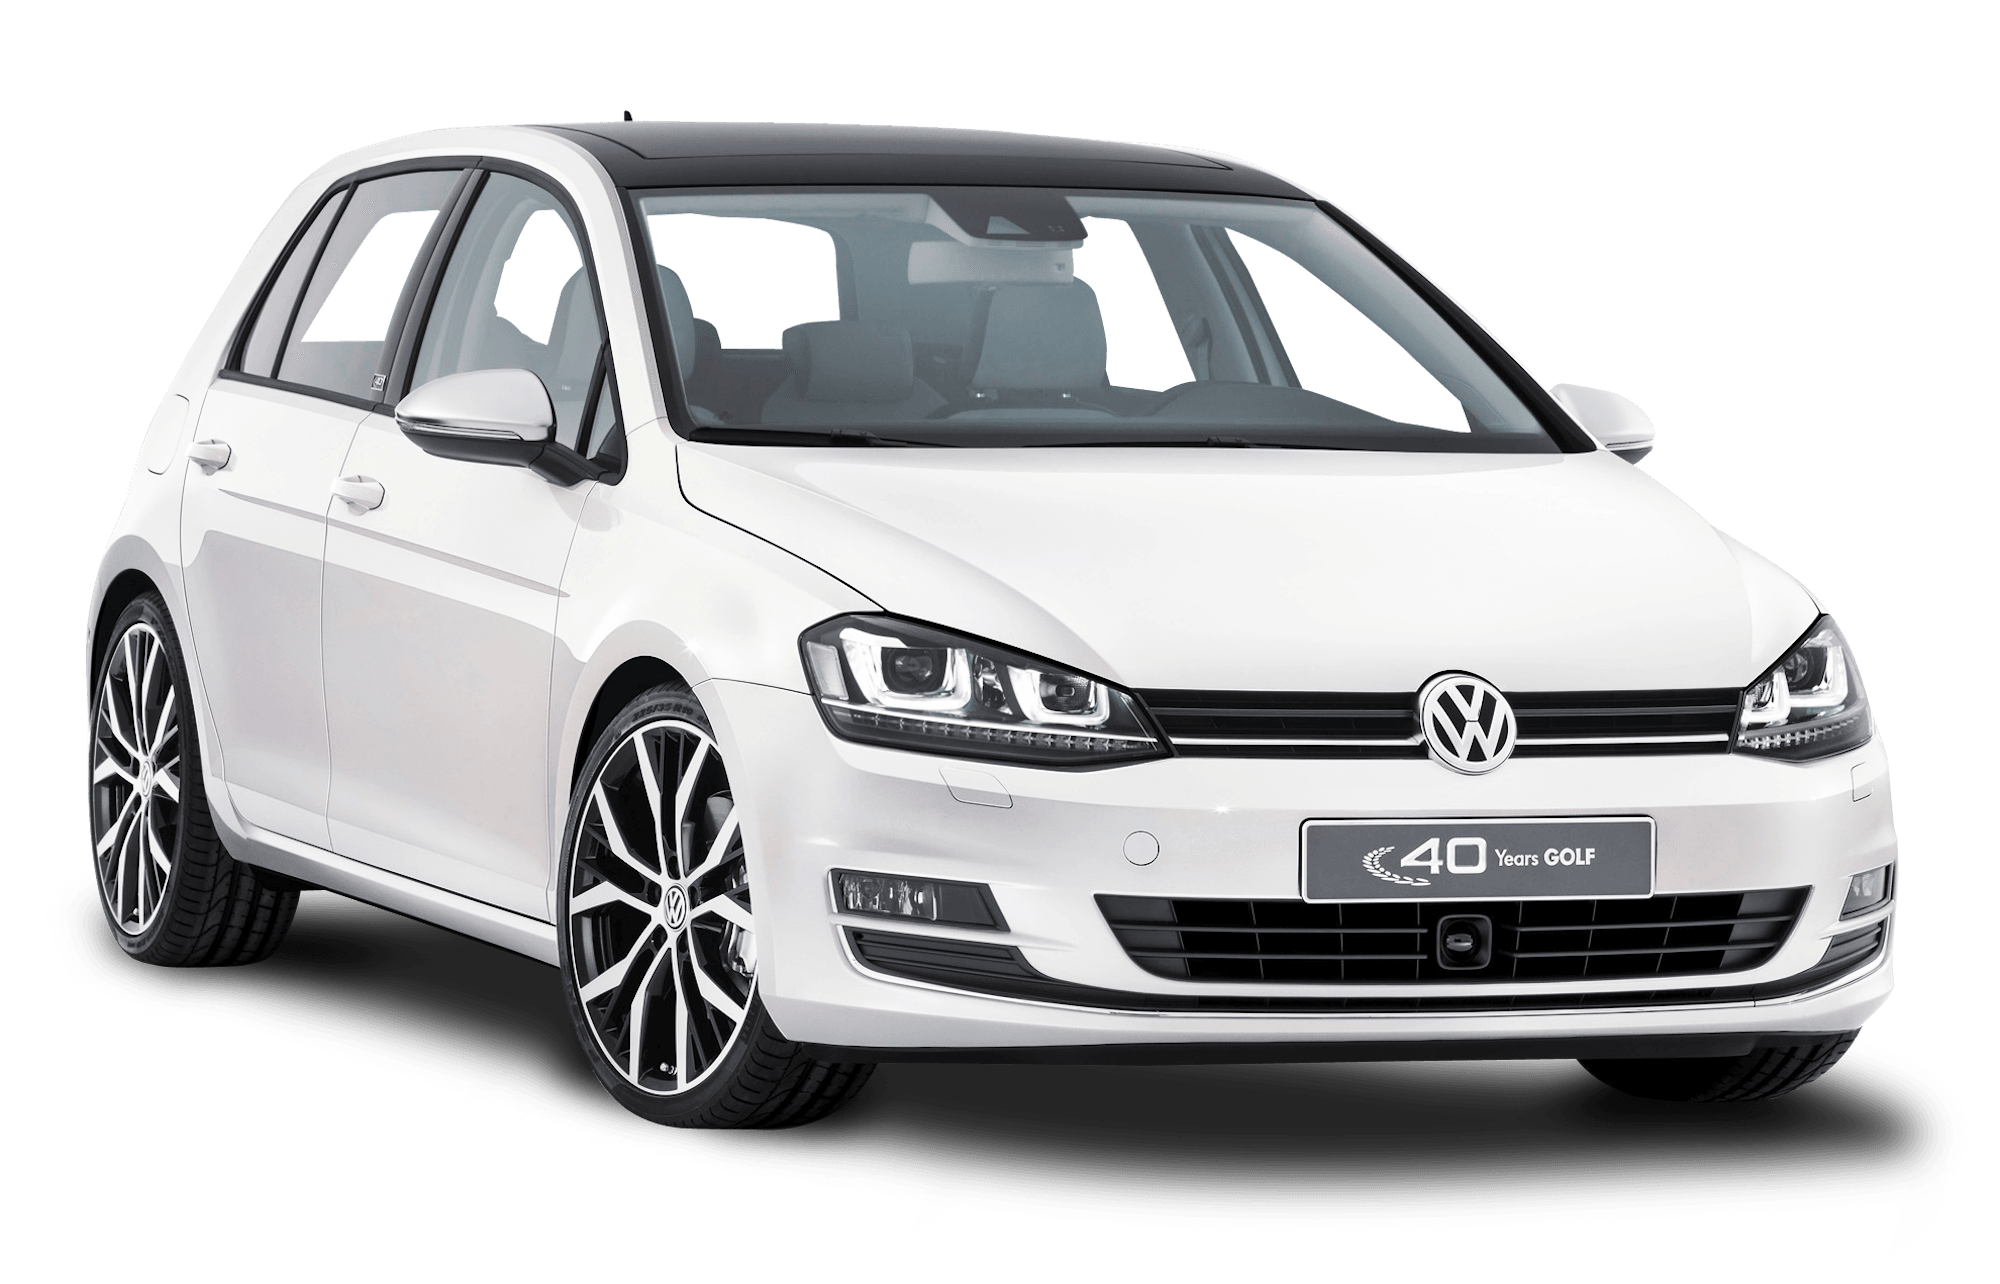 Find your best Volkswagen finance rate with Driva